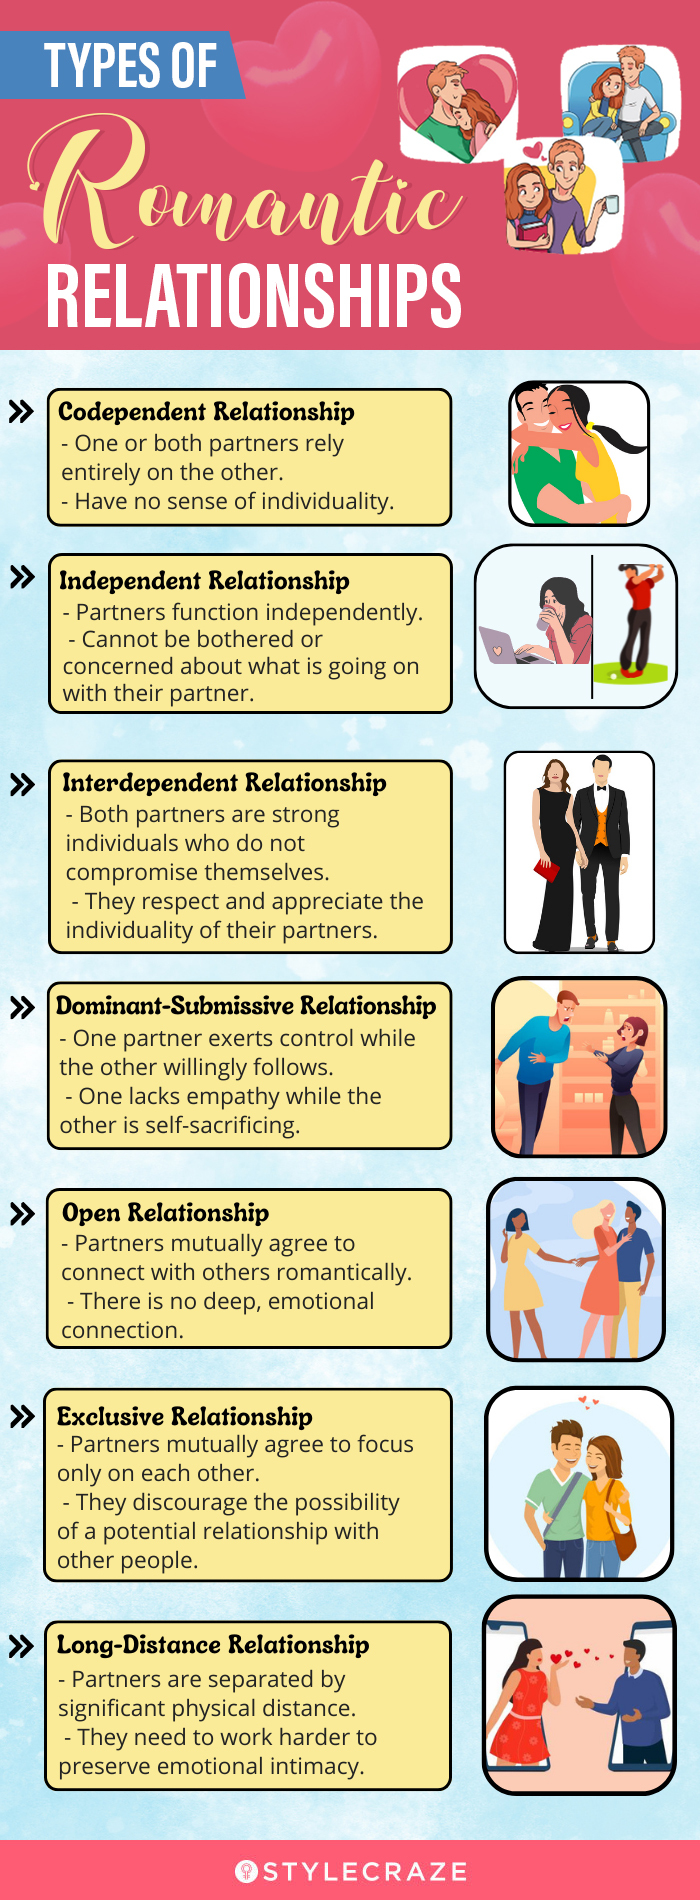 types of romantic relationships [infographic]